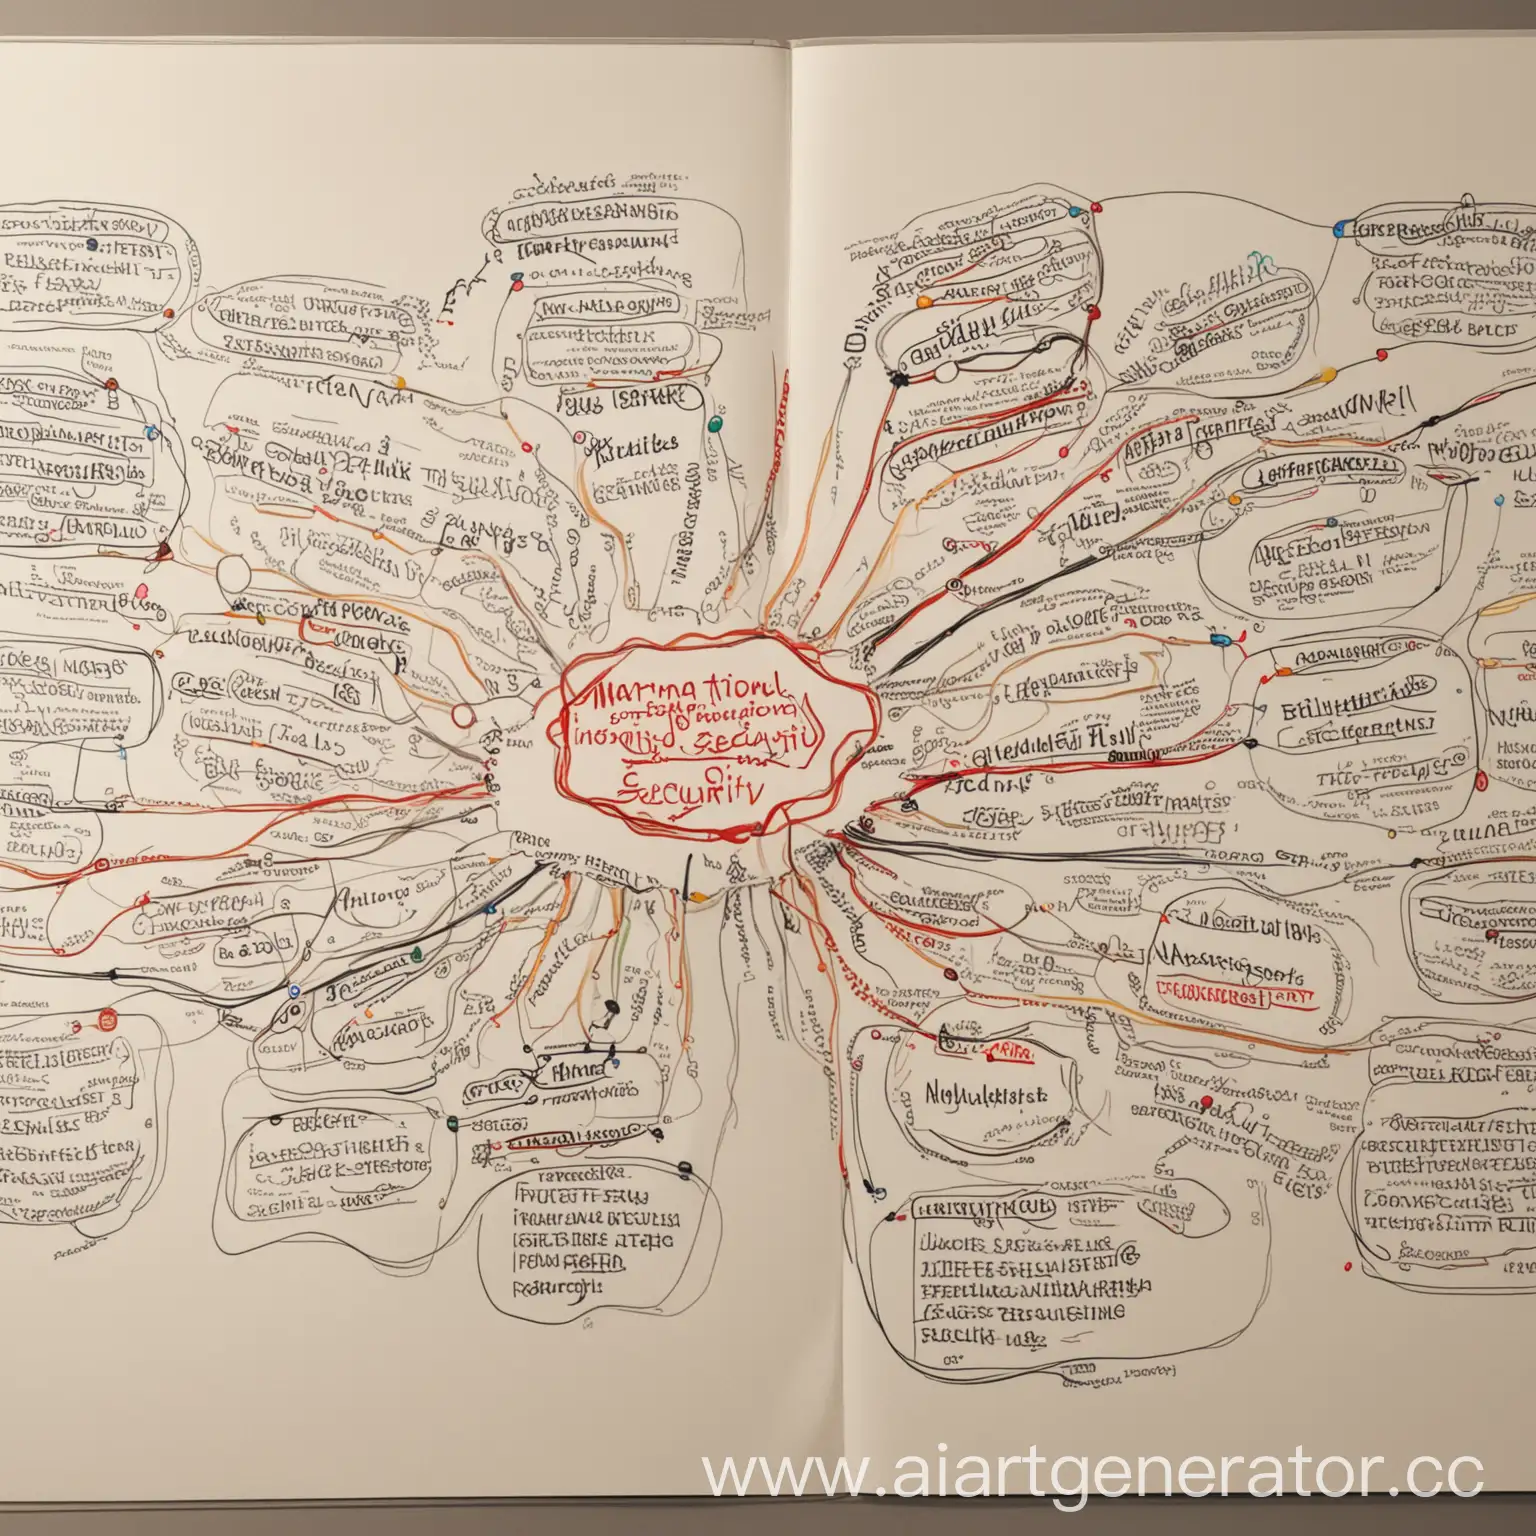 Comprehensive-Mindmap-Guide-to-Information-Security